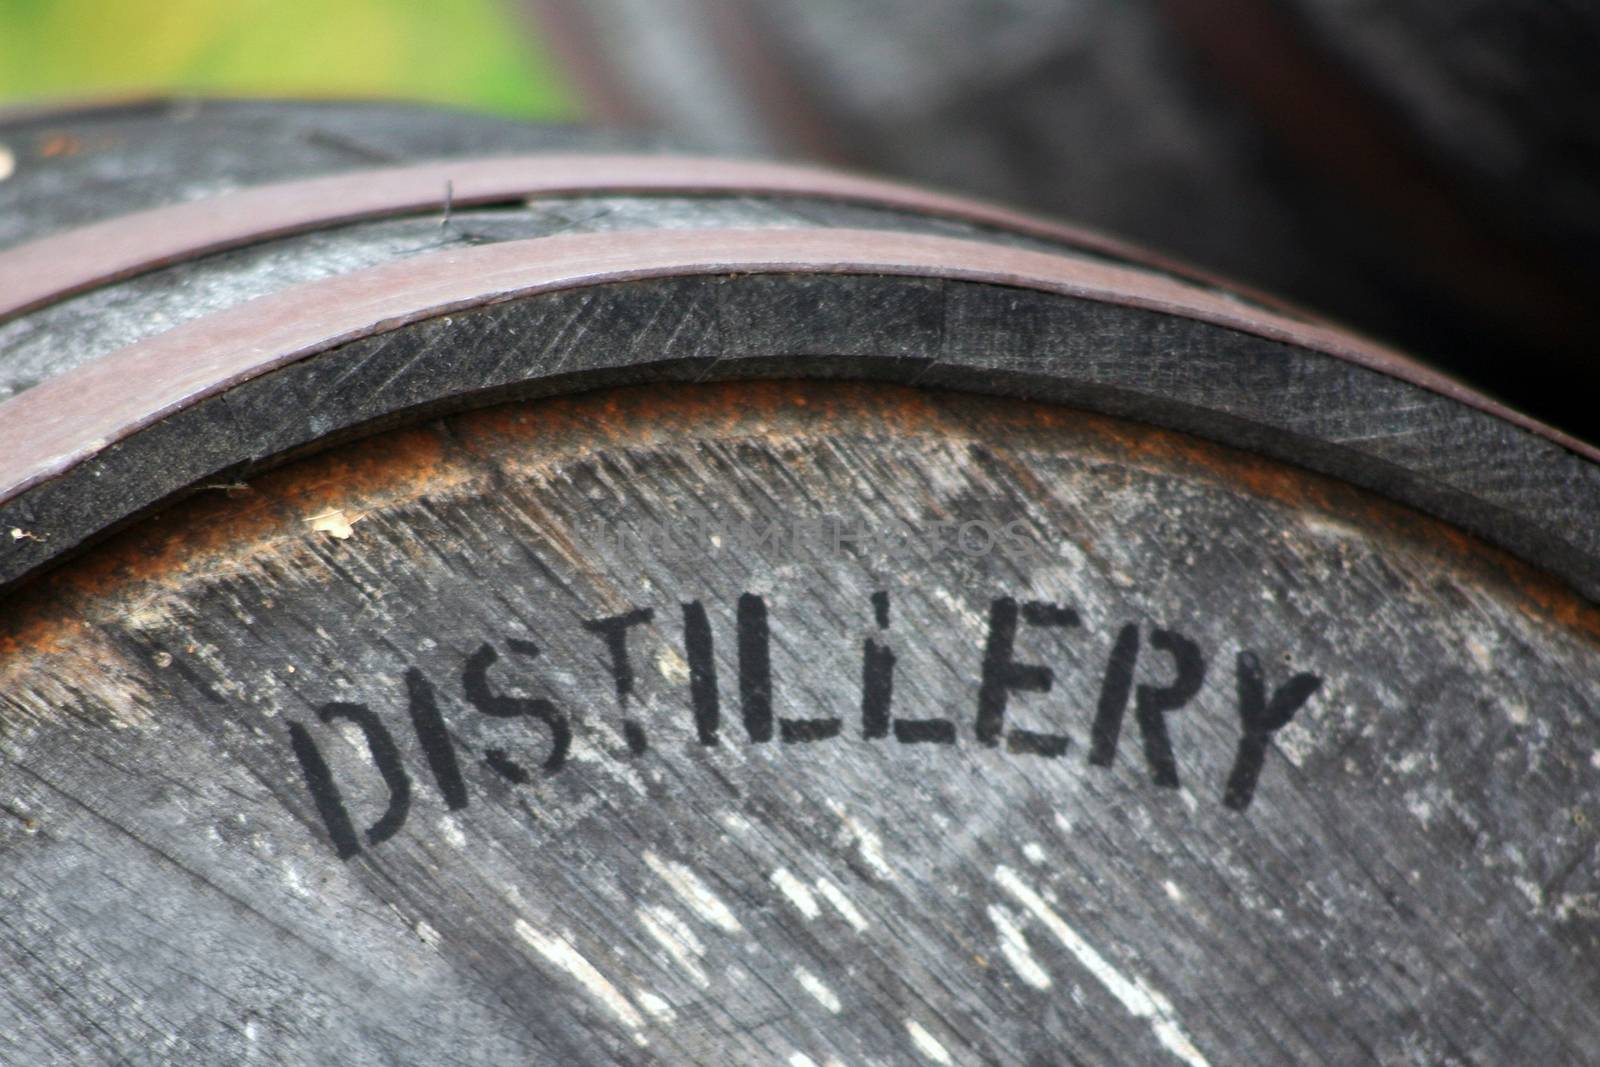 Used oak barrel for whiskey aging by jimmartin